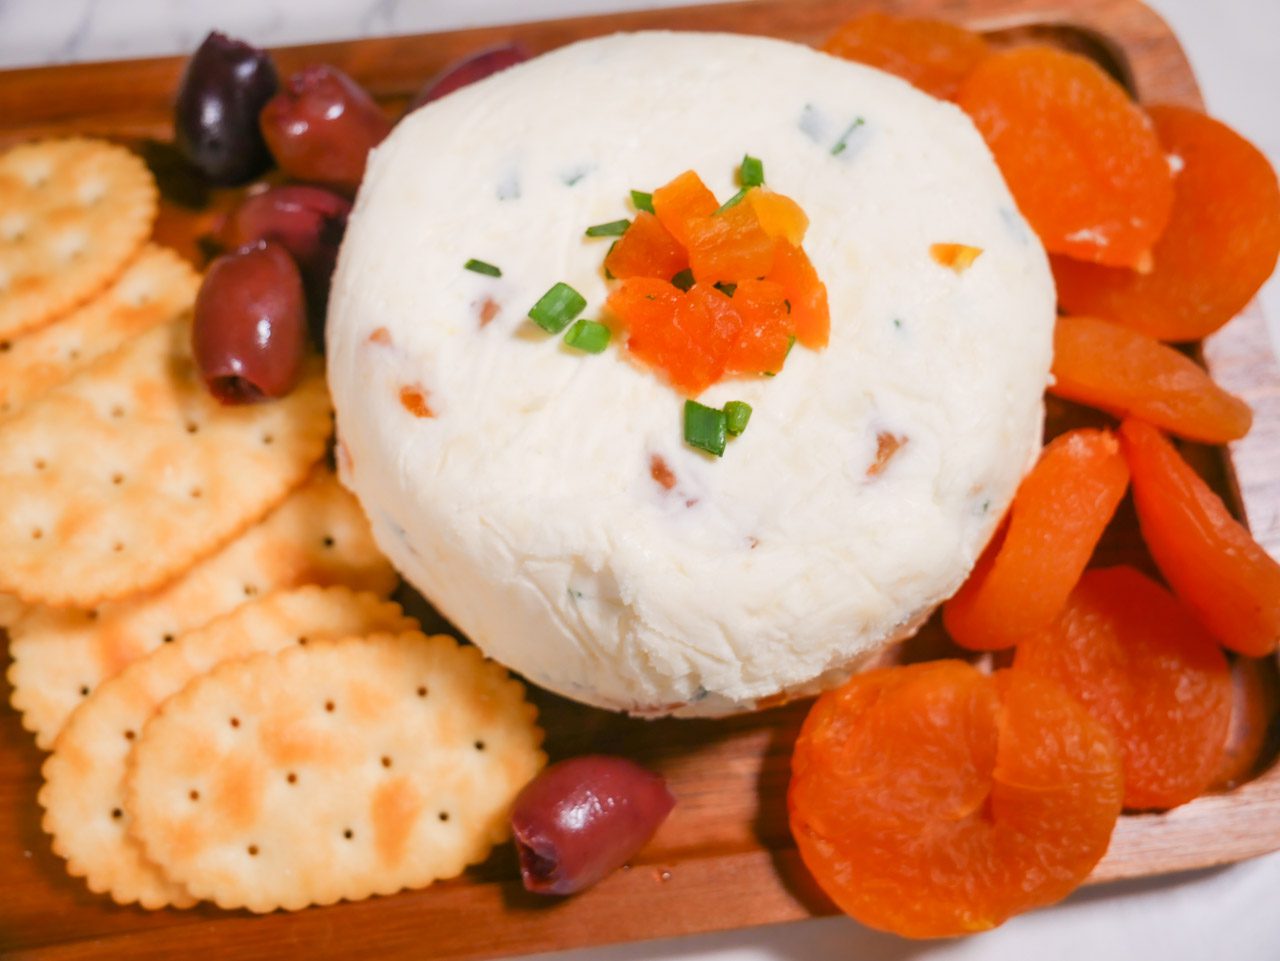 Apricot cheese on a platter with crackers, apricot, and olives.